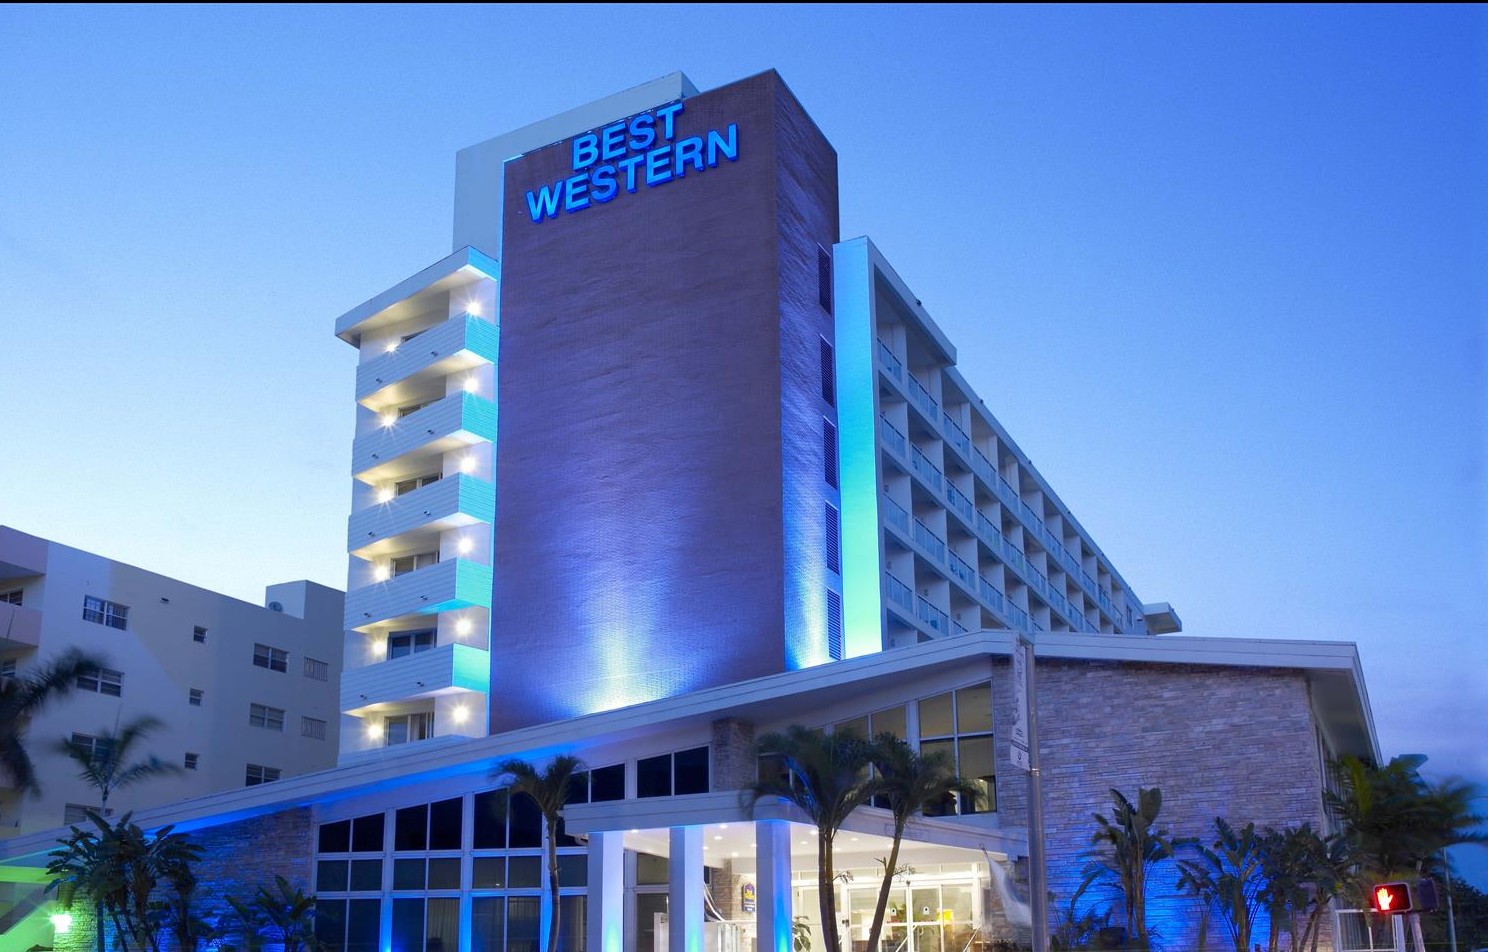 Best Western rebrand as more than just a hotel – The Nibbler